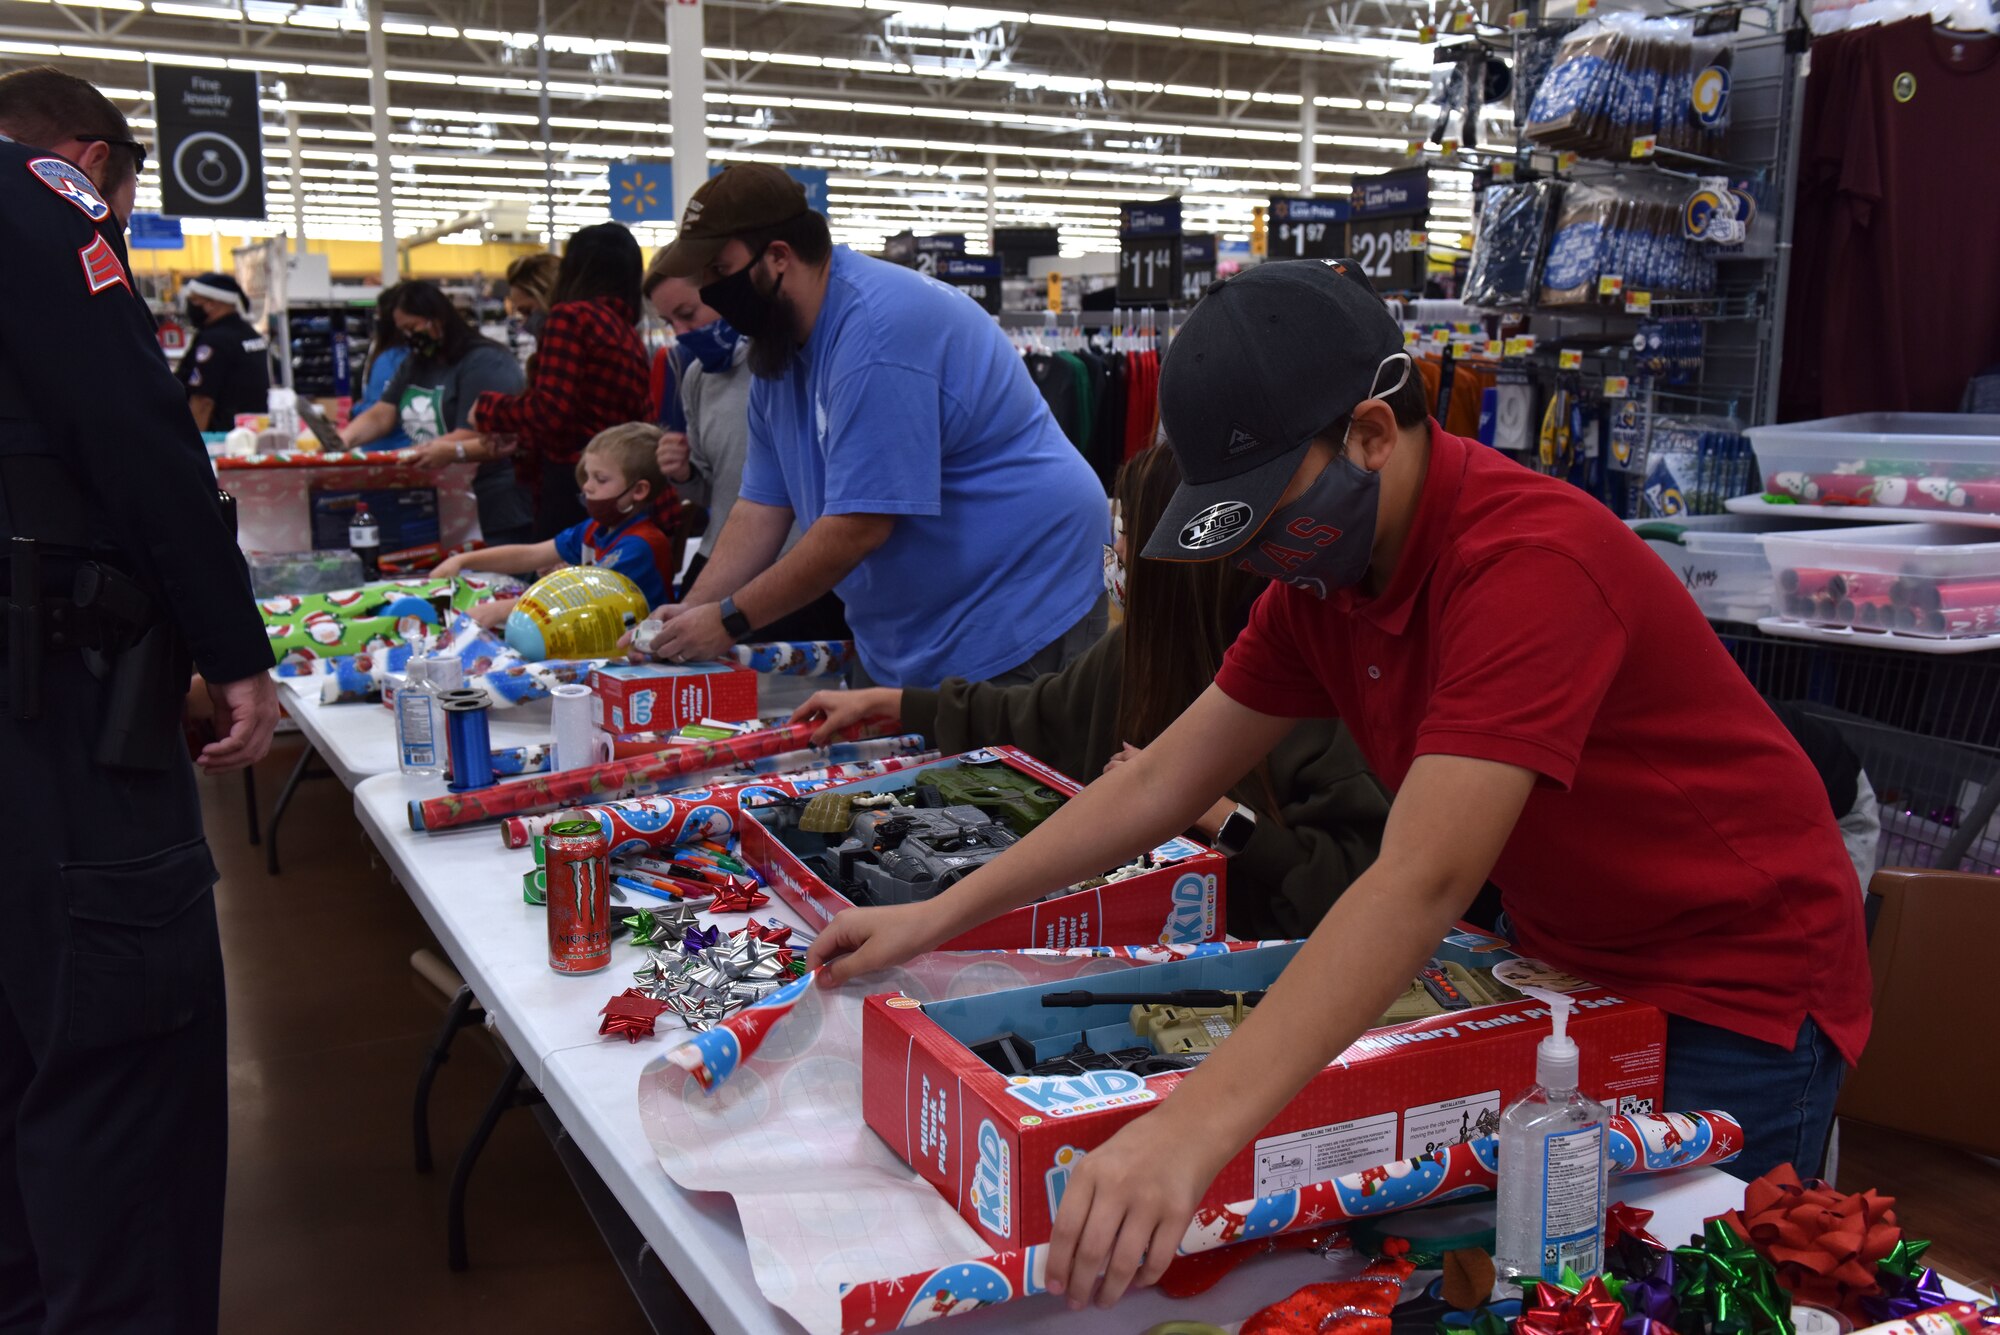 Volunteers wrap gifts that participants of the 13th Annual Operation Blue Santa picked during the event in San Angelo, Texas, Dec. 12, 2020. Family members of the police officers helped participants pick out gifts, wrap presents or provide refreshments. (U.S. Air Force photo by Staff Sgt. Seraiah Wolf)